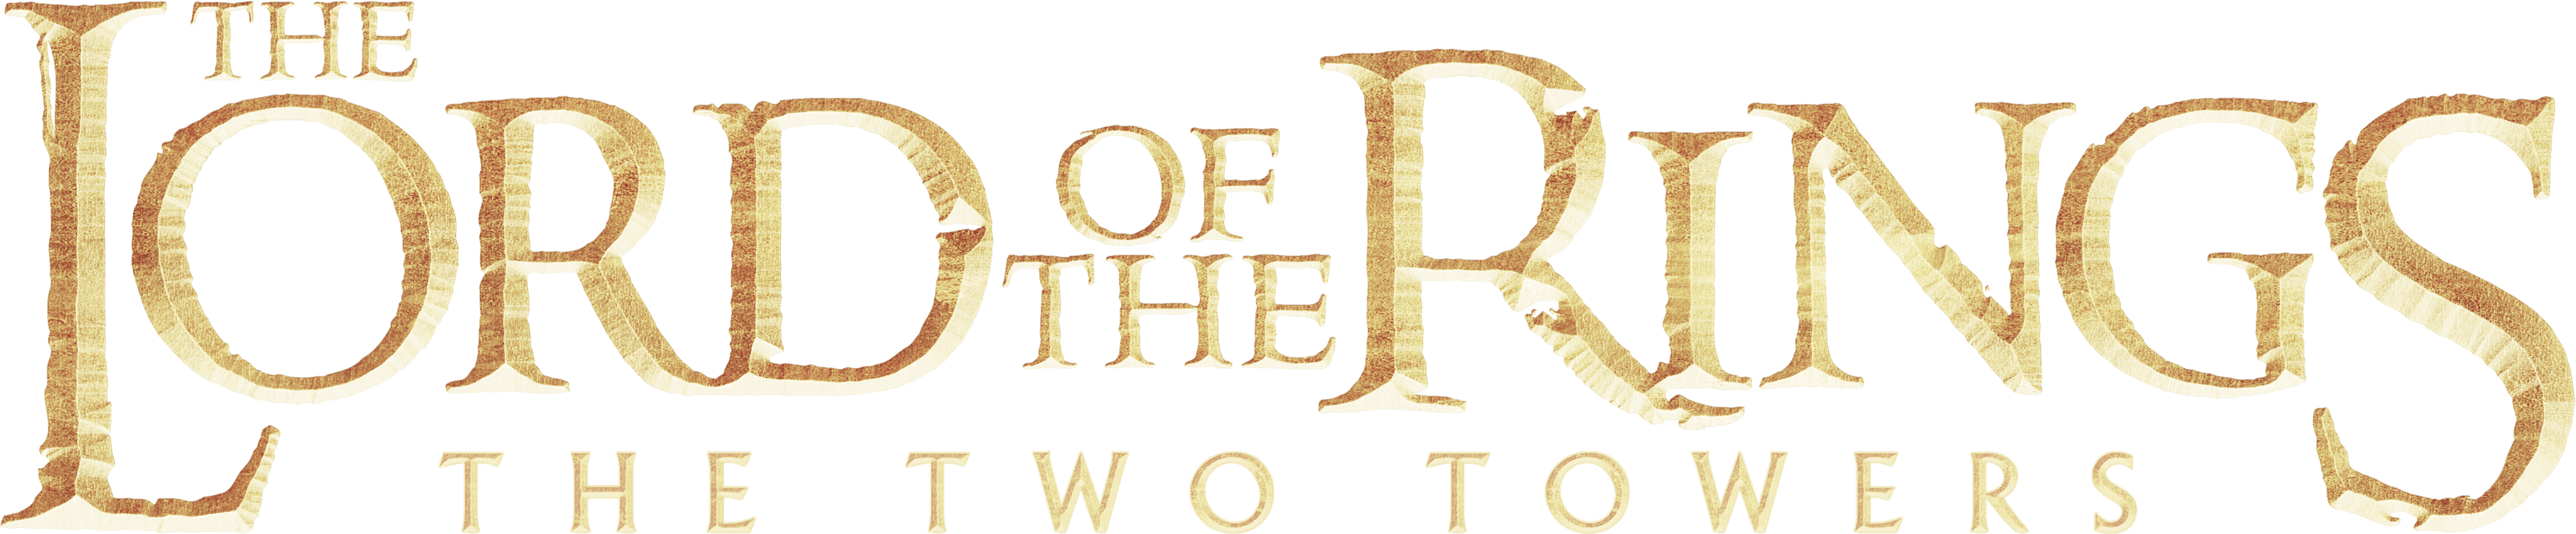 The Lord of the Rings: The Two Towers logo